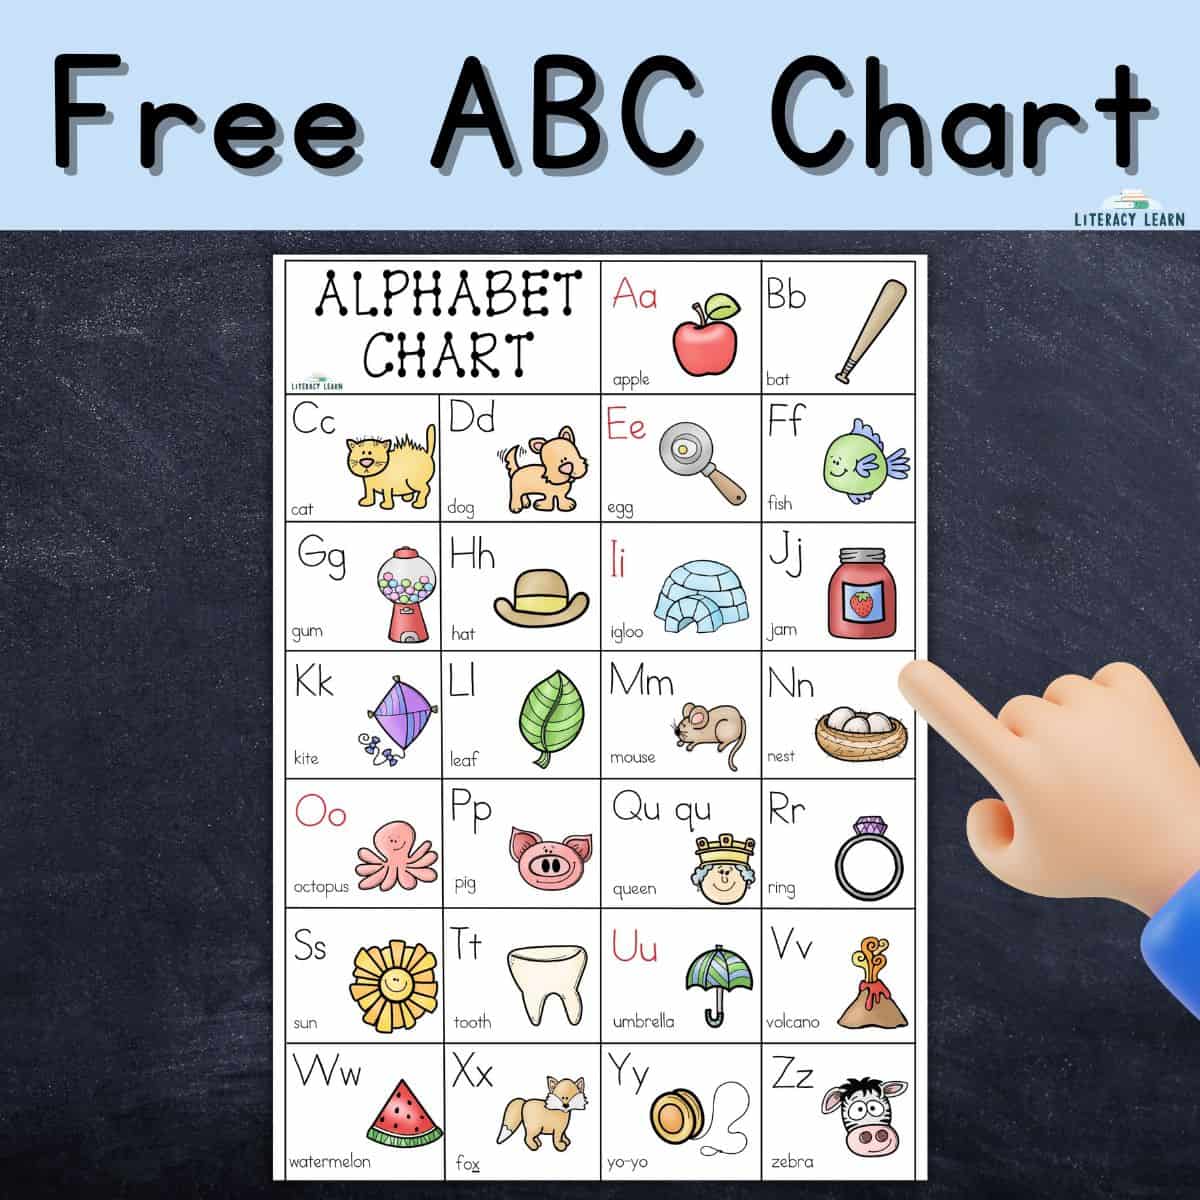 Large ABC chart with letters A-Z, pictures, and keywords on chalkboard background.